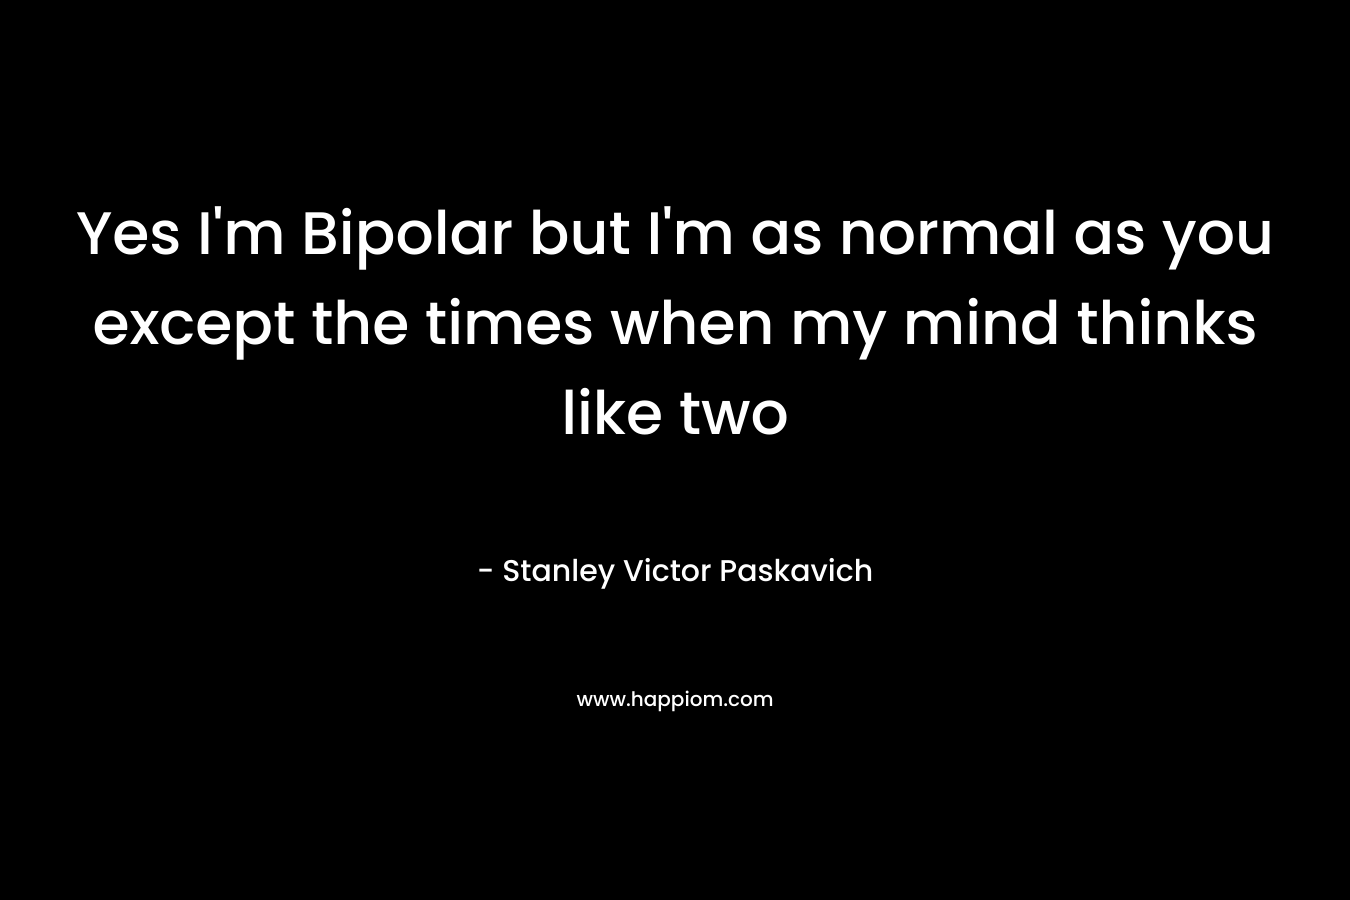 Yes I'm Bipolar but I'm as normal as you except the times when my mind thinks like two